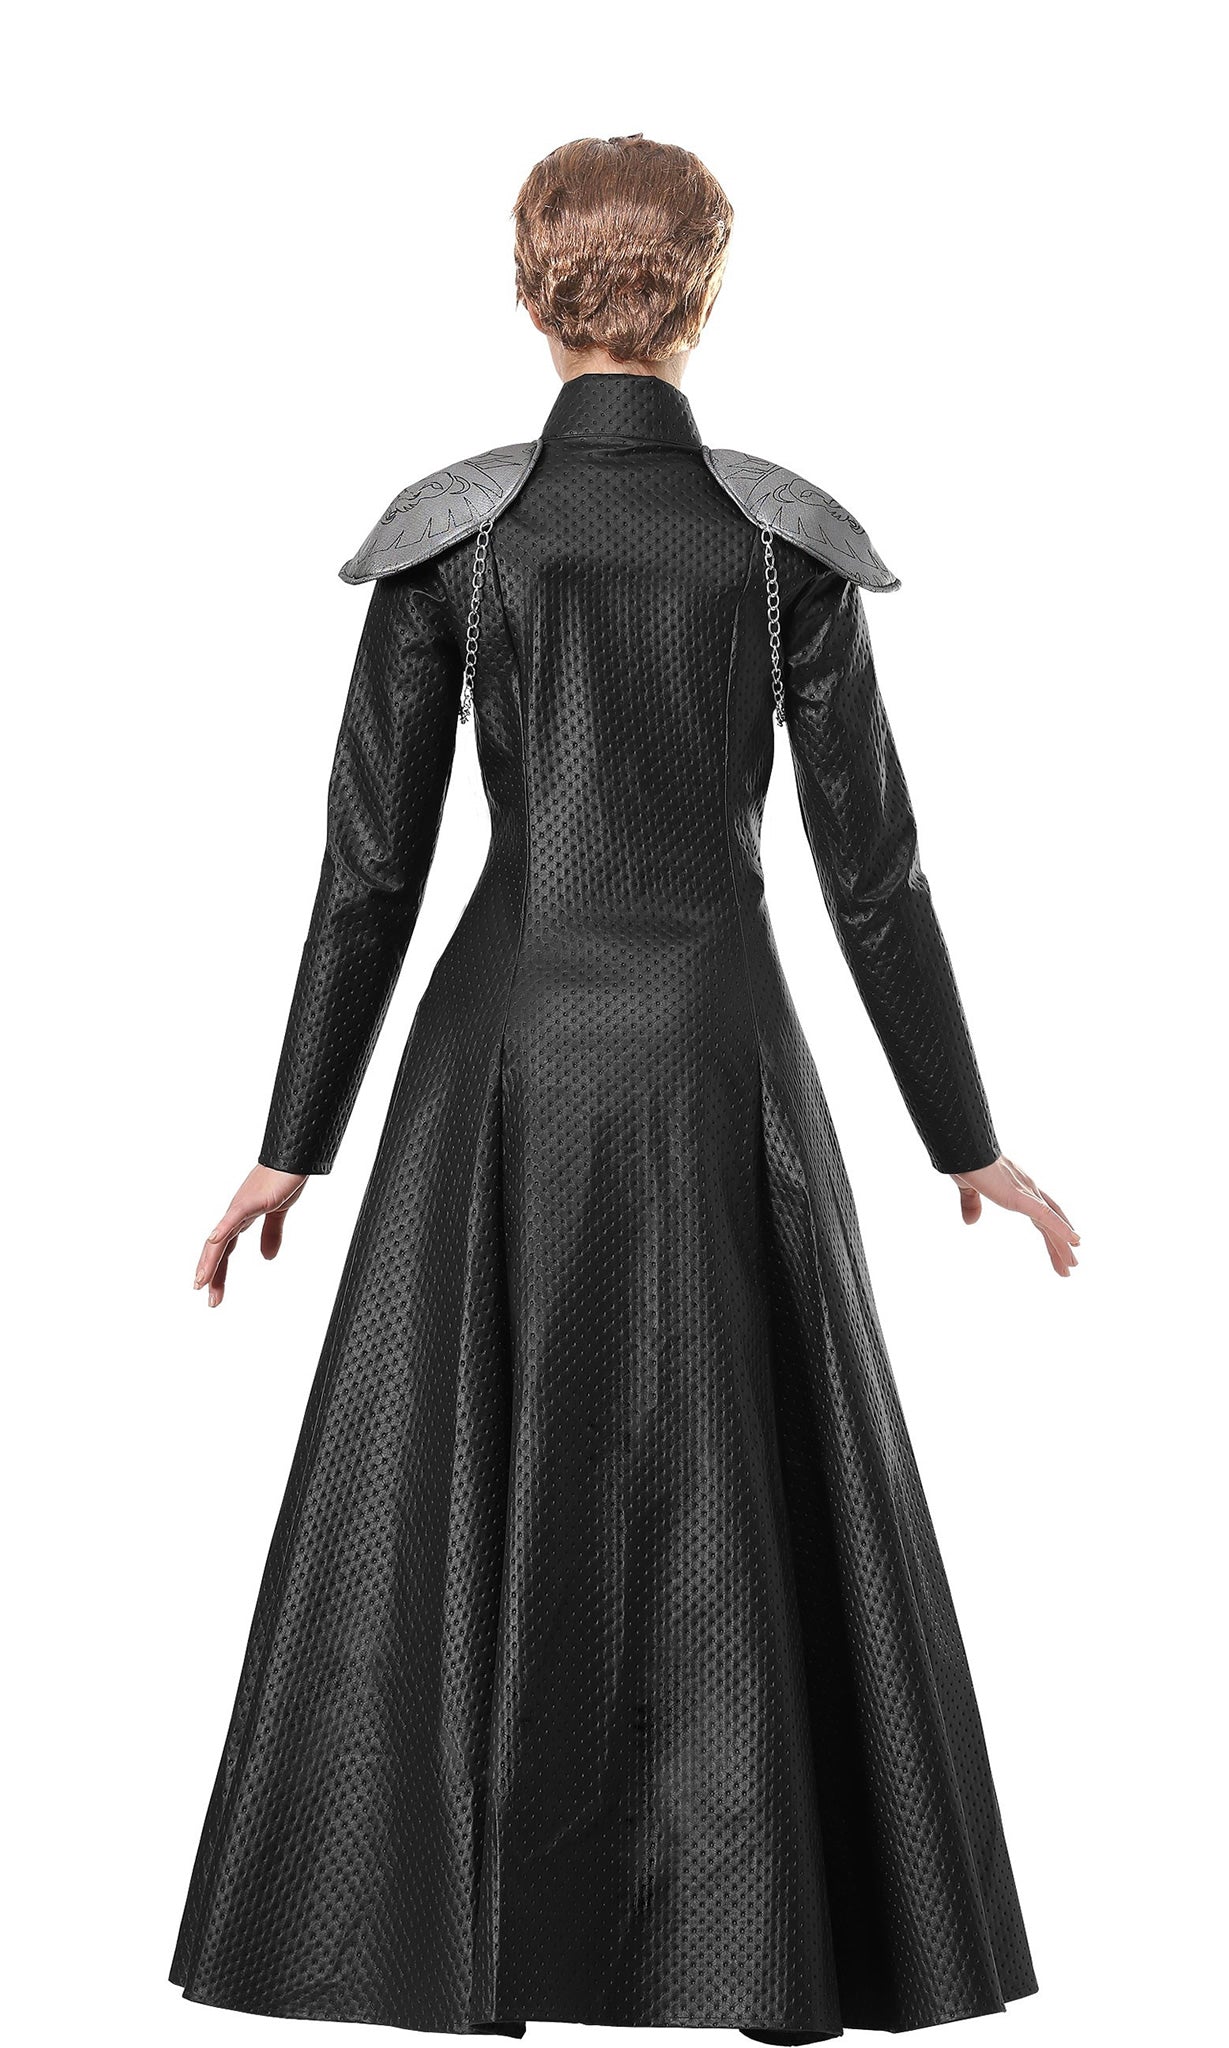 Back of long black armor dress in black with attached petticoat and chain